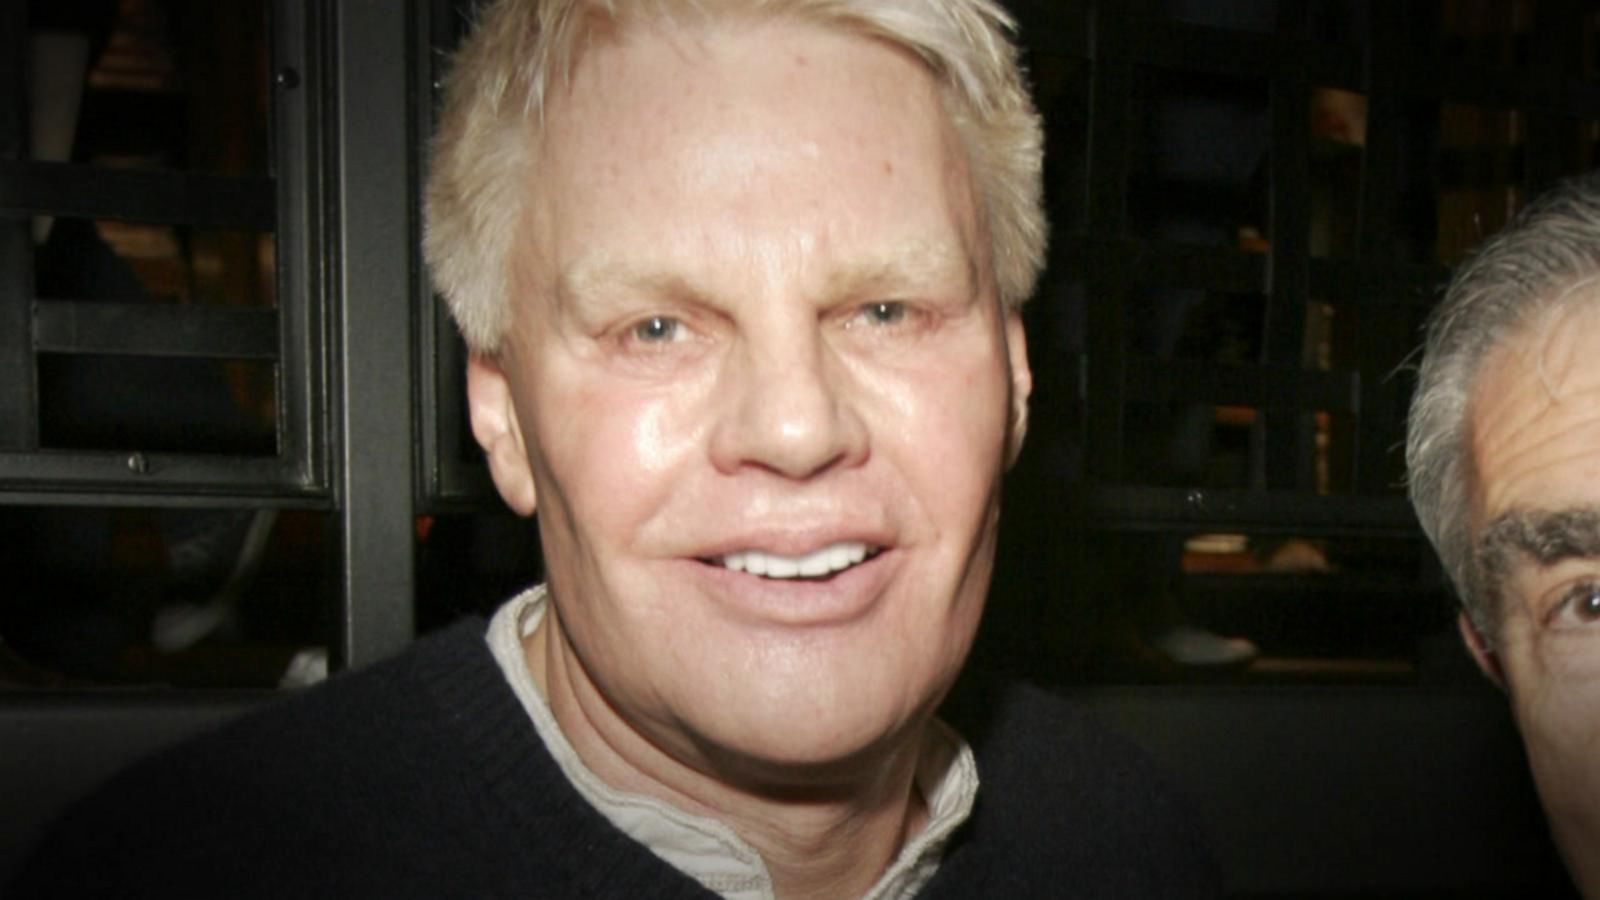 Former Abercrombie and Fitch CEO accused of sexual abuse - Good Morning ...